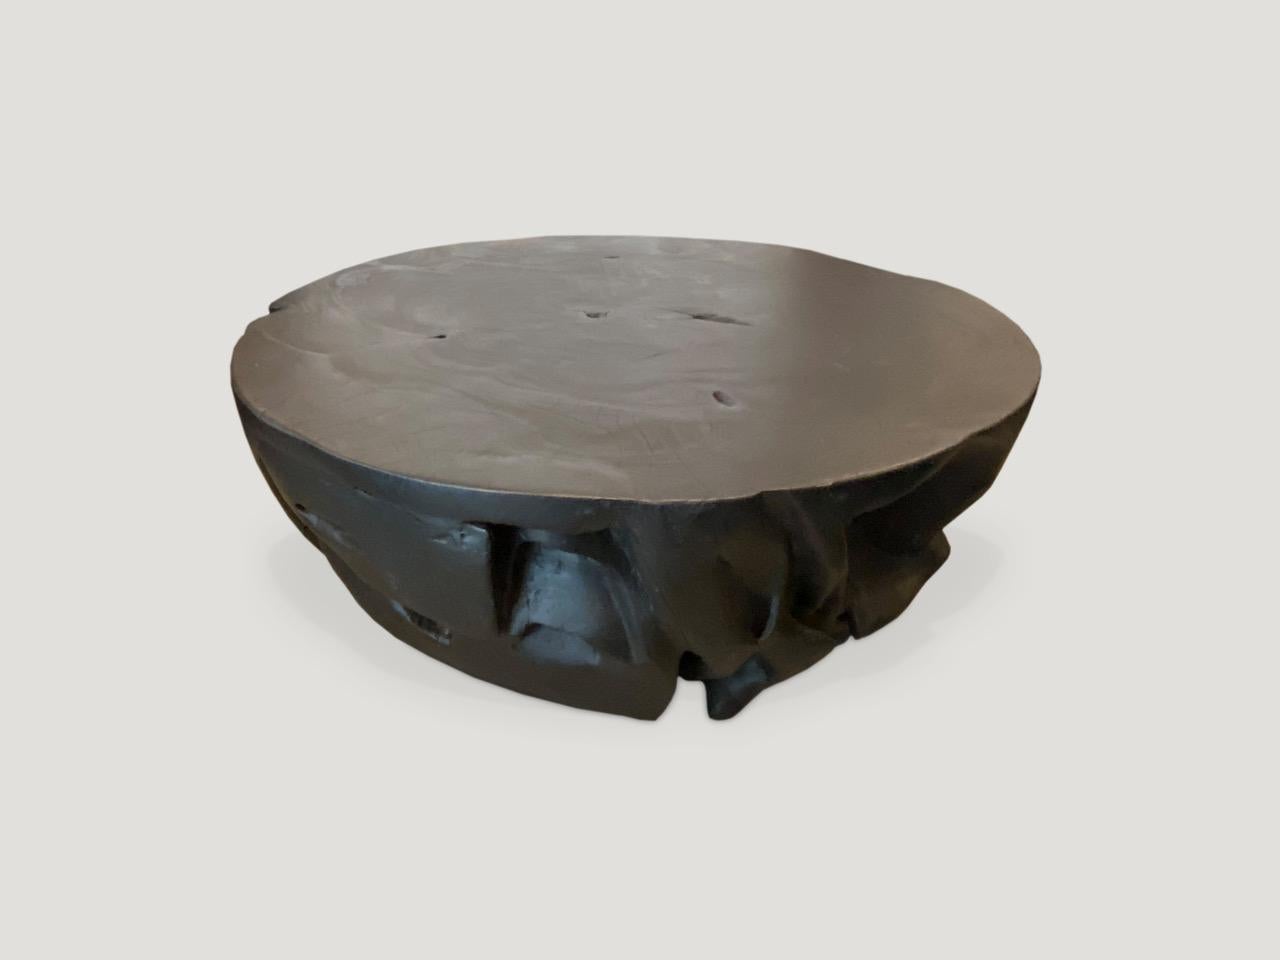 Impressive reclaimed teak wood coffee table hand carved from a massive single teak root. It’s rare to find a piece this large with the top section totally flat, smooth and usable.

The Triple Burnt Collection represents a unique line of modern